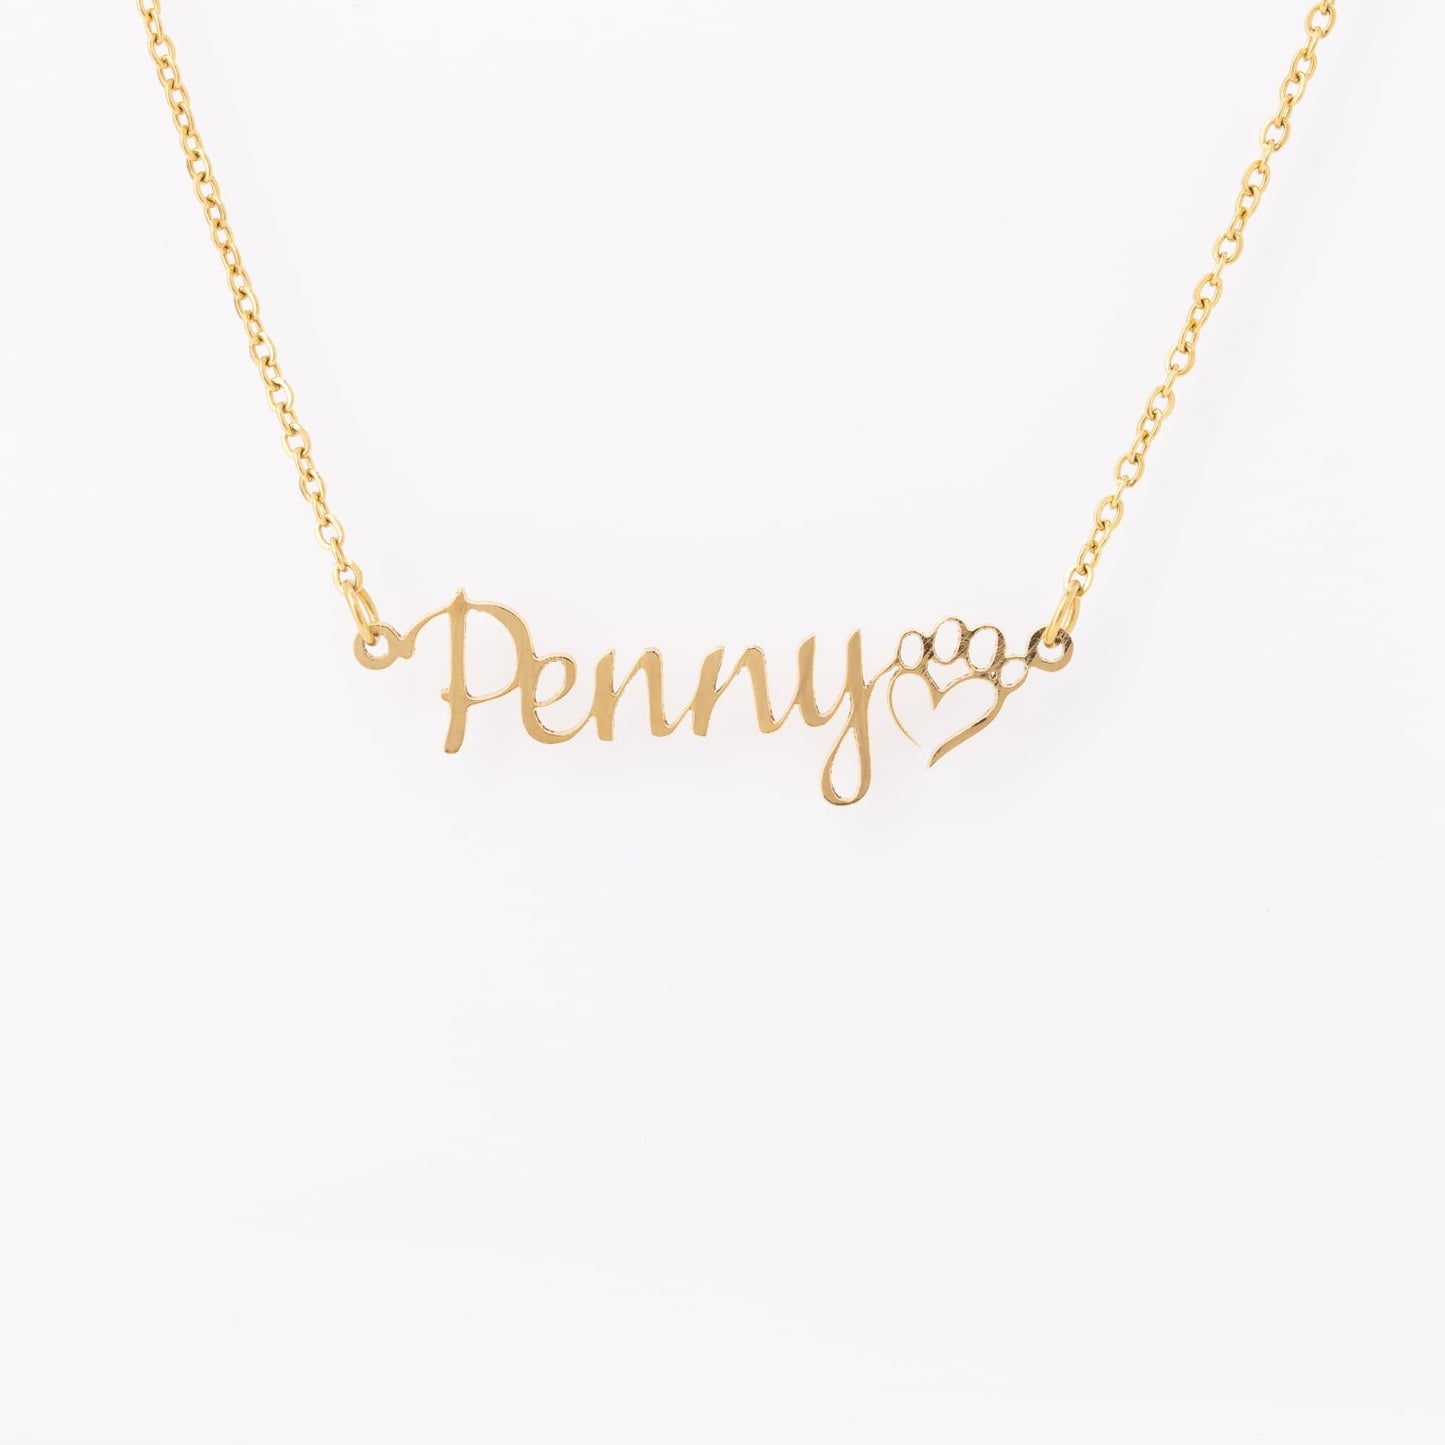 Dog Mom Name Necklace - Thoughtful and Personalized Gift for Pet Parents, Ecofriendly